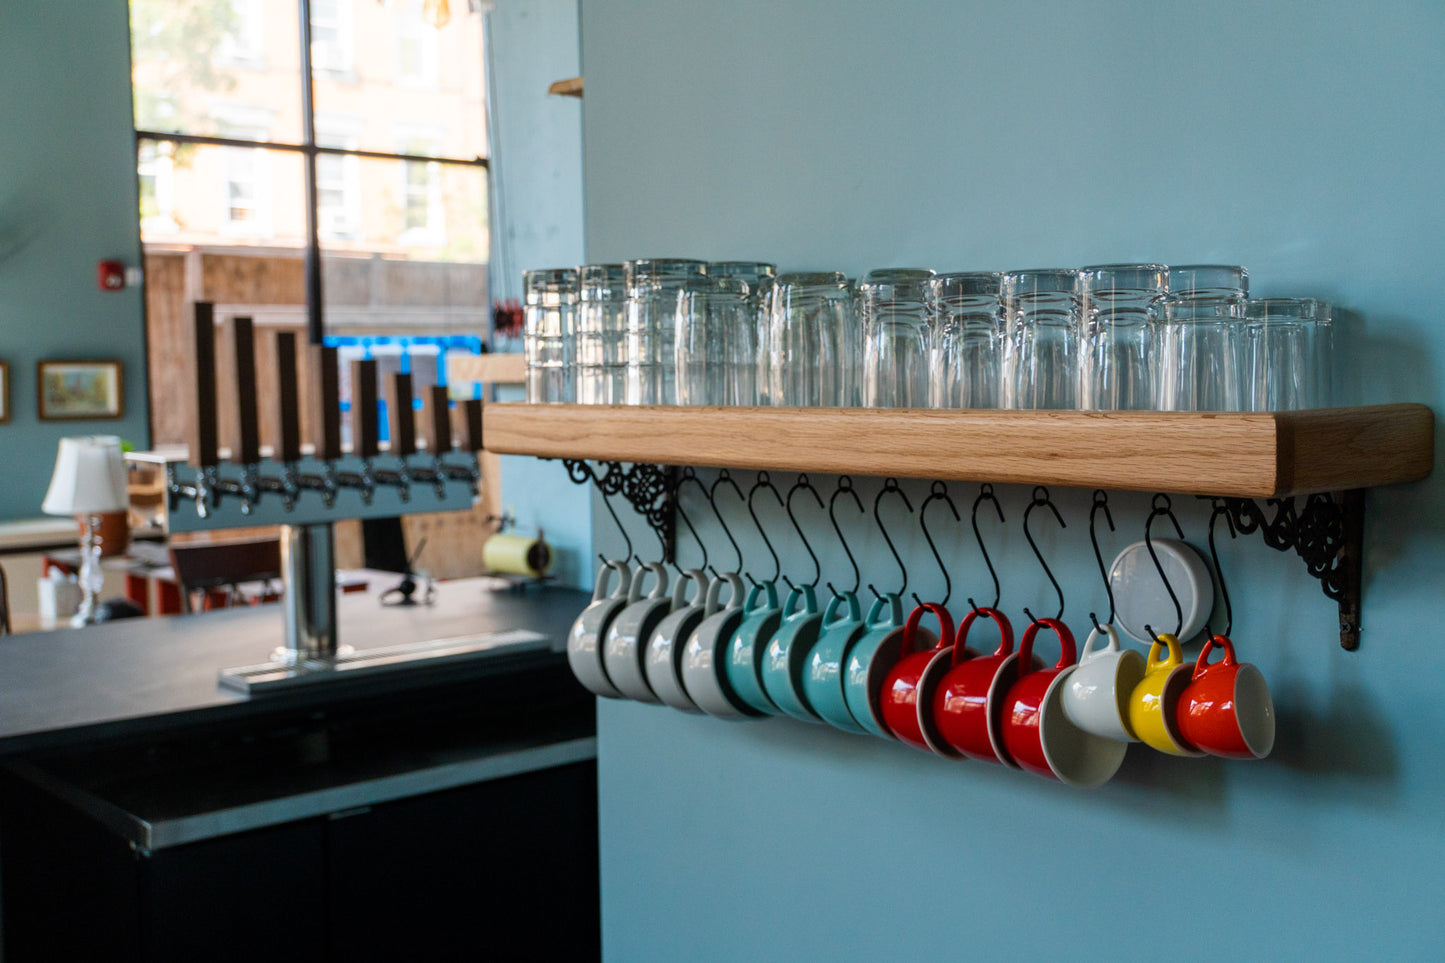 A high-quality and customizable coffee mug shelf is mounted on a blue wall. Various sized glasses are stacked on top of the shelf and below hang five white mugs, four blue mugs, three red mugs, and a yellow and orange espresso cups. In the back, out of focus is a bar tap with seven wooden taps in descending sizes.